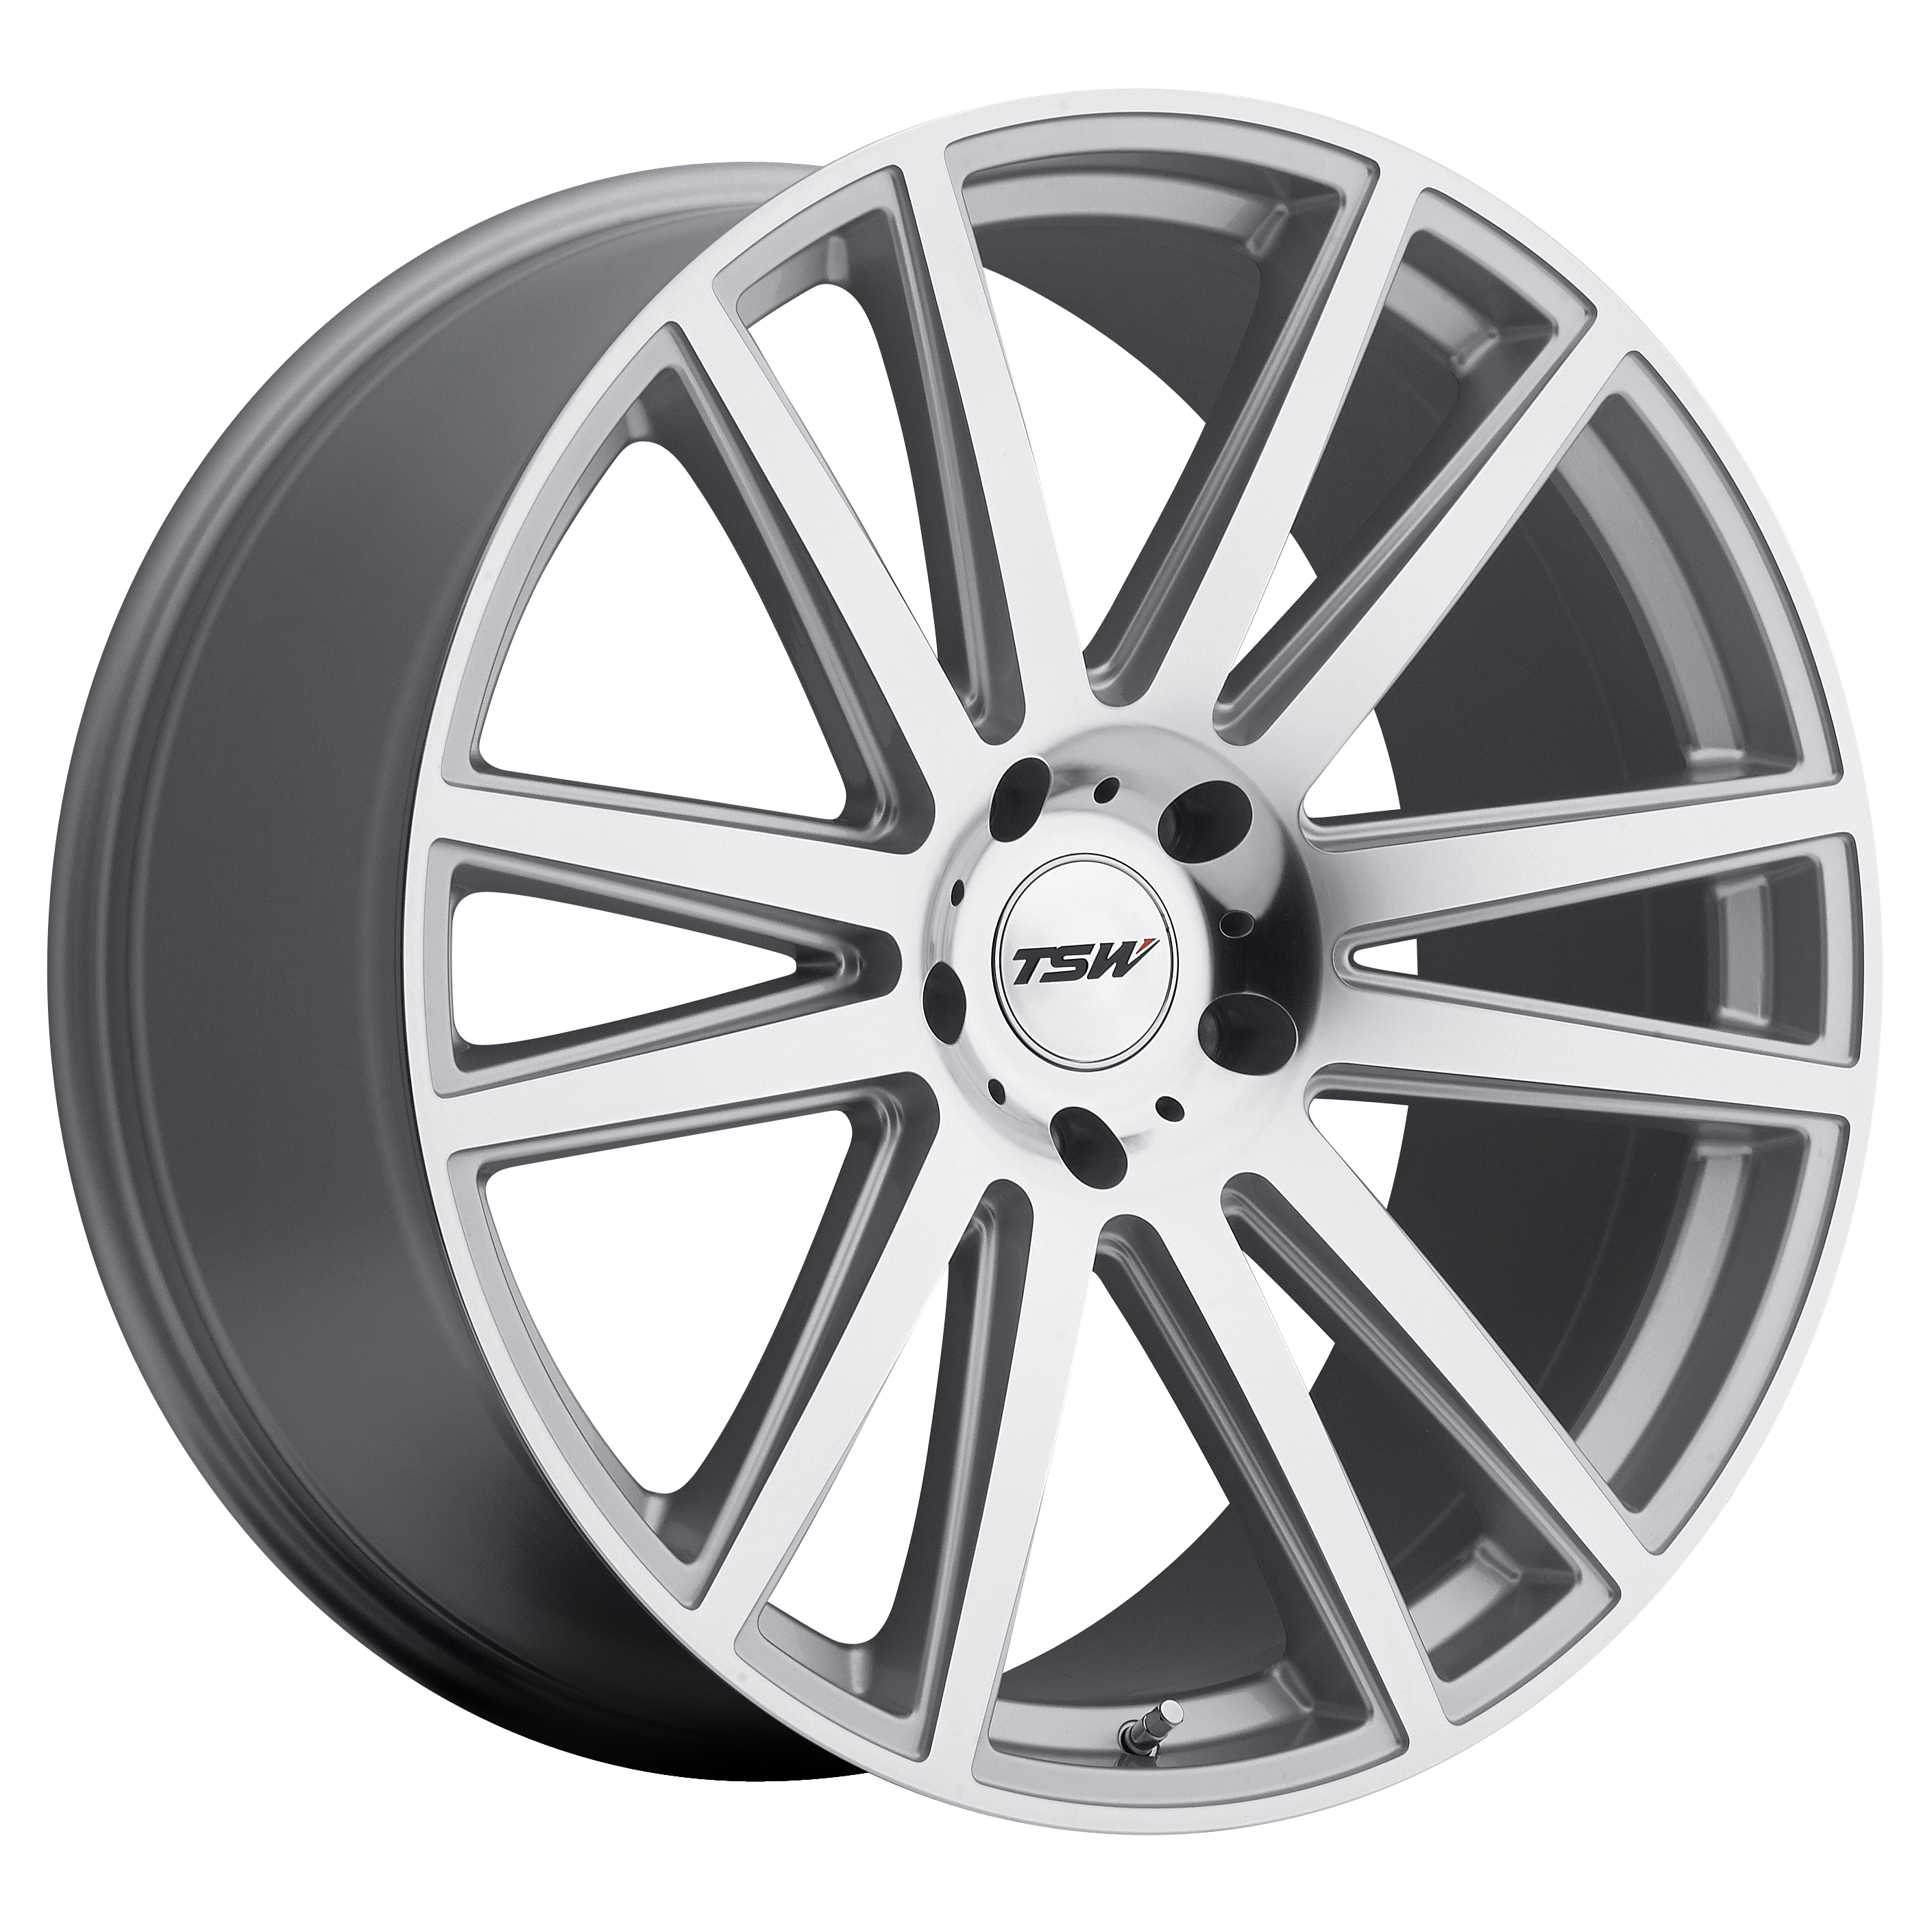 GATSBY  WHEELS AND RIMS PACKAGES